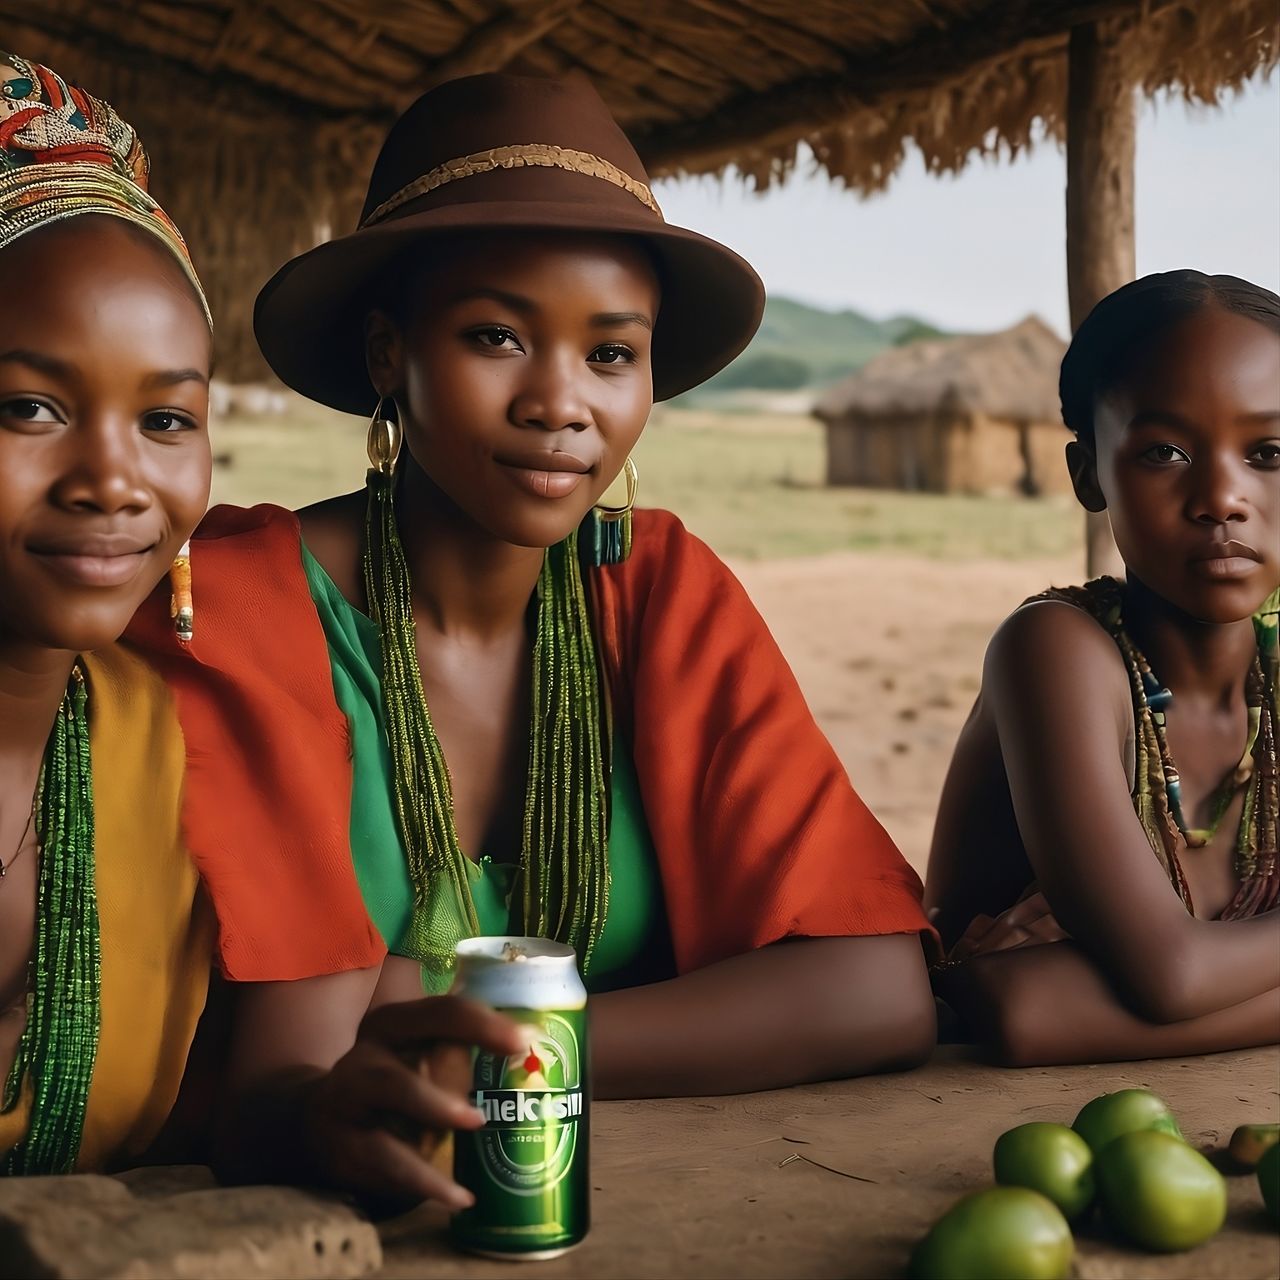 food and drink, portrait, child, women, adult, drink, sitting, friendship, looking at camera, smiling, female, clothing, childhood, happiness, togetherness, men, emotion, soft drink, refreshment, person, food, two people, lifestyles, fashion accessory, relaxation, young adult, nature, summer, cheerful, land, hat, tribe, drinking, temple, teenager, indigenous culture, leisure activity, human face, enjoyment, trip, outdoors, vacation, poverty